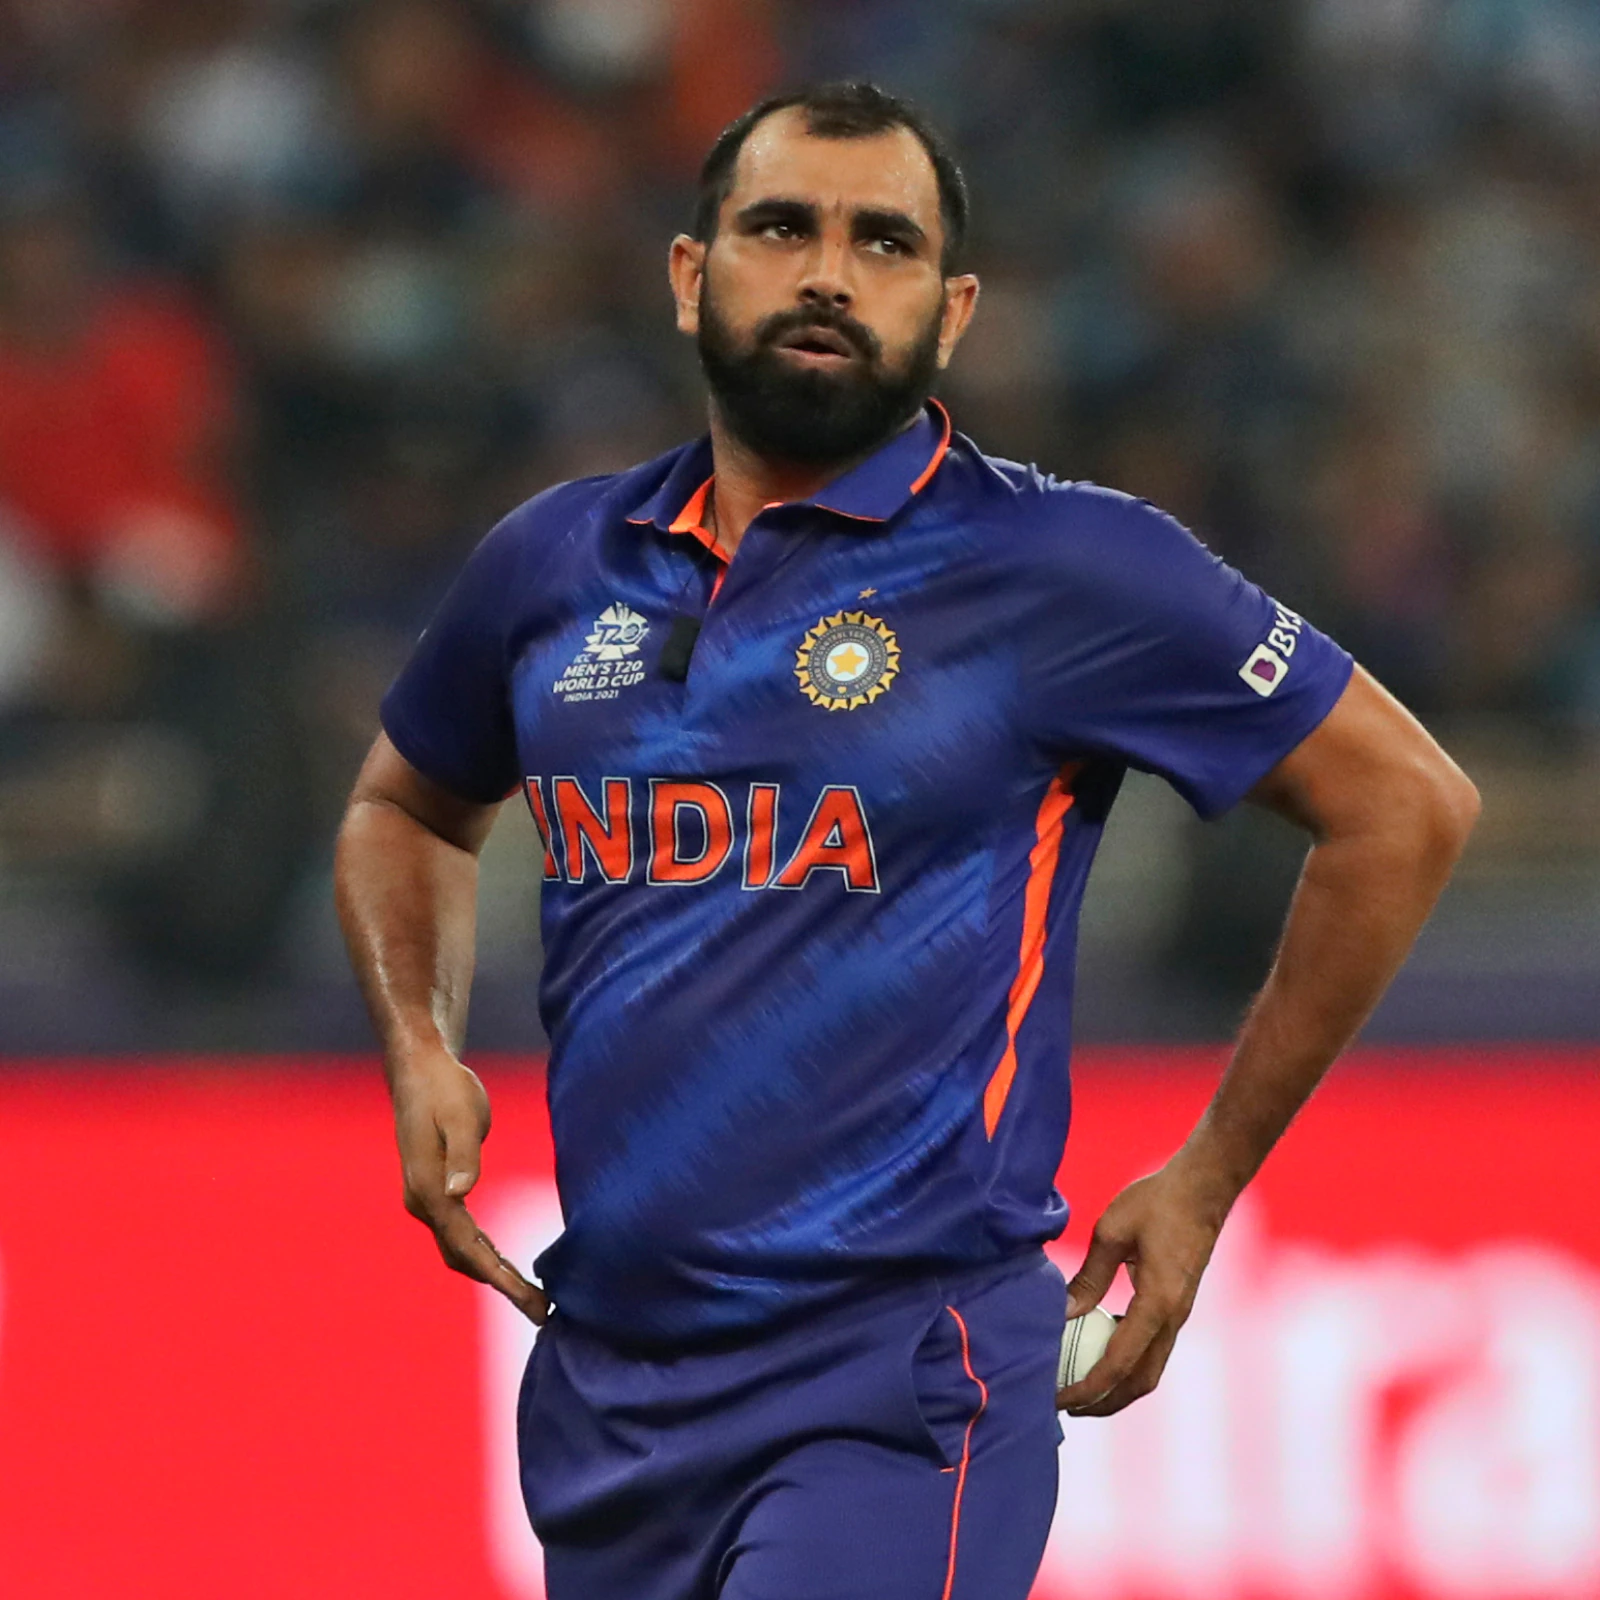 “This Needs To Stop” – Cricket Greats Comes In Support Of Mohammed Shami After Online Abuse